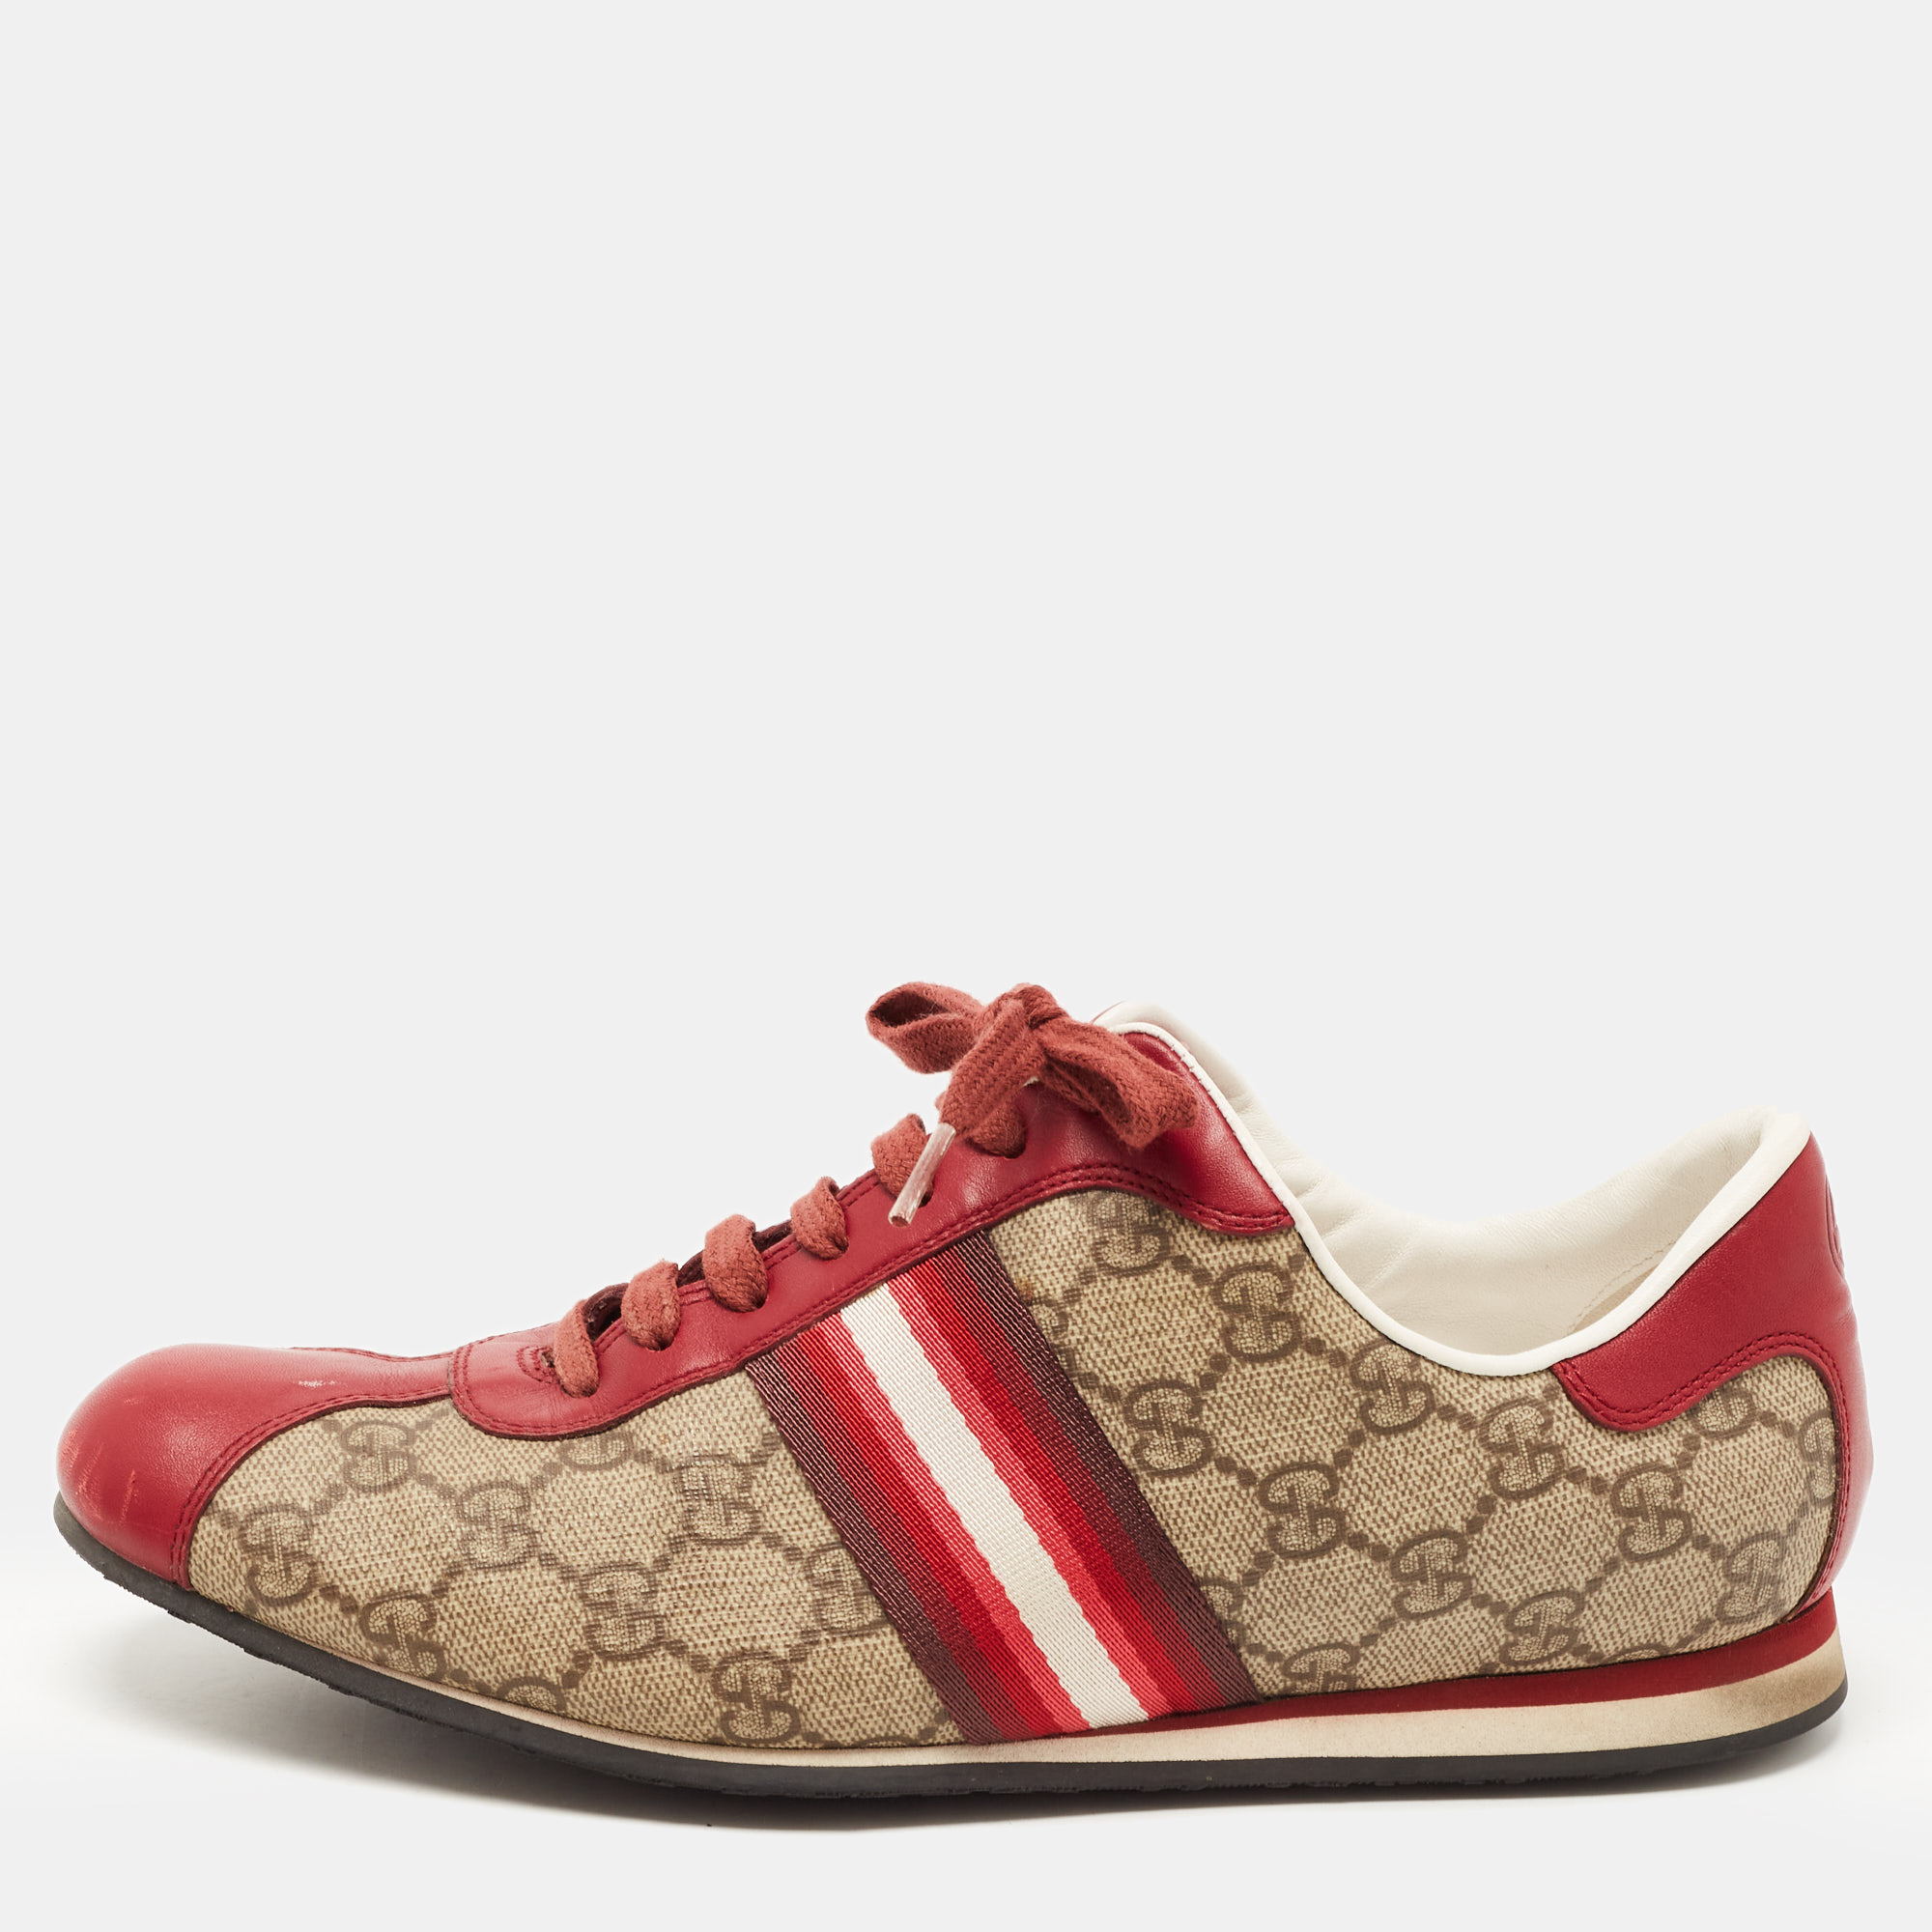 Gucci Red/Beige GG Canvas And Leather Web Low Top Sneakers Size 39